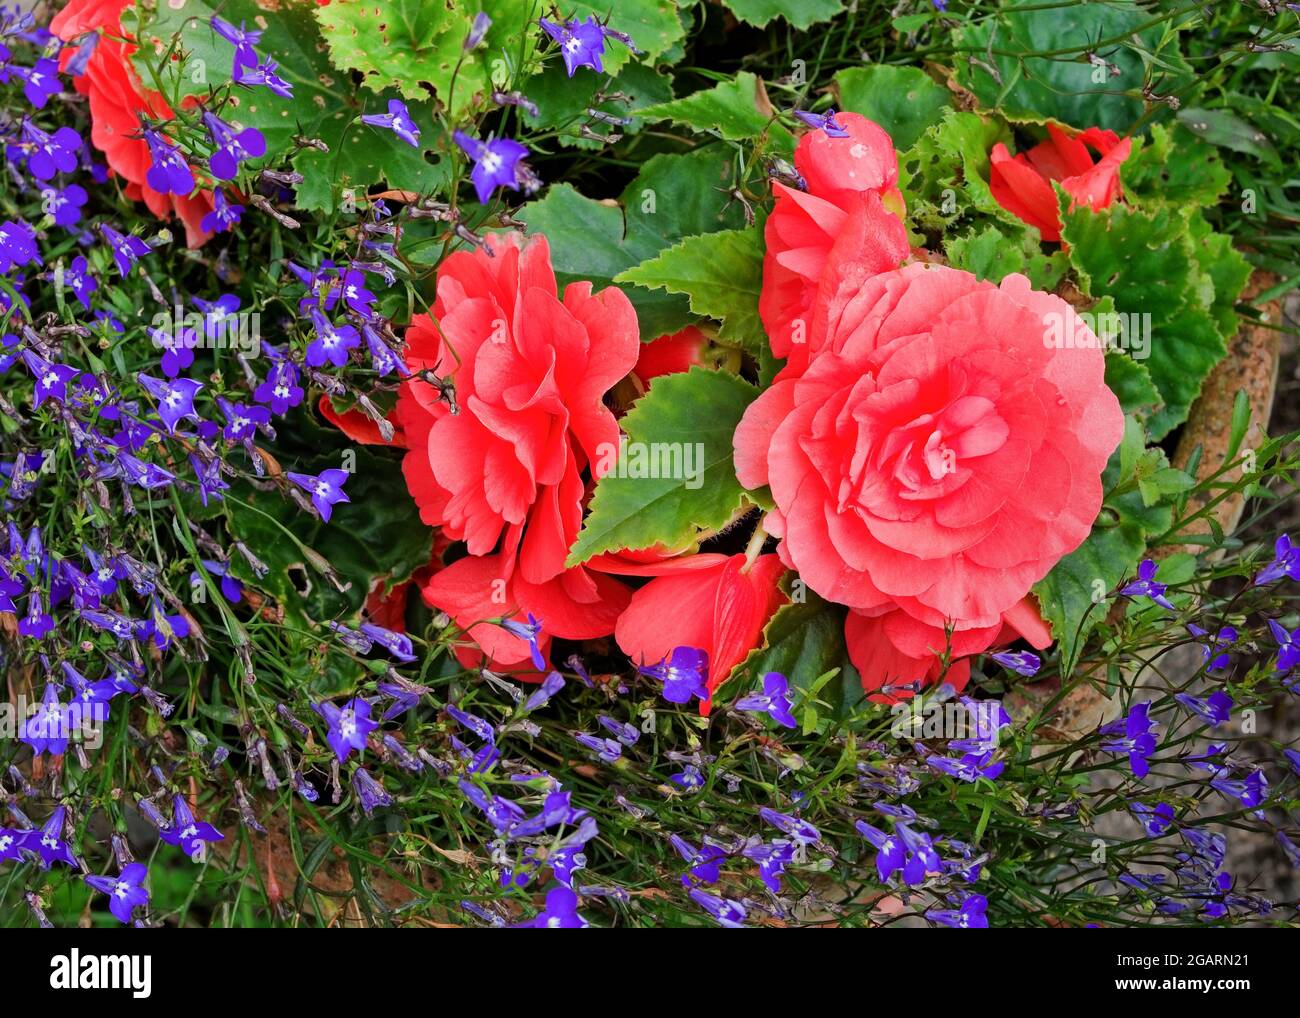 Late summer flowering deep pink double begonia flowers and  blue/purple trailing lobelia in terracotta pot, August England UK Stock Photo